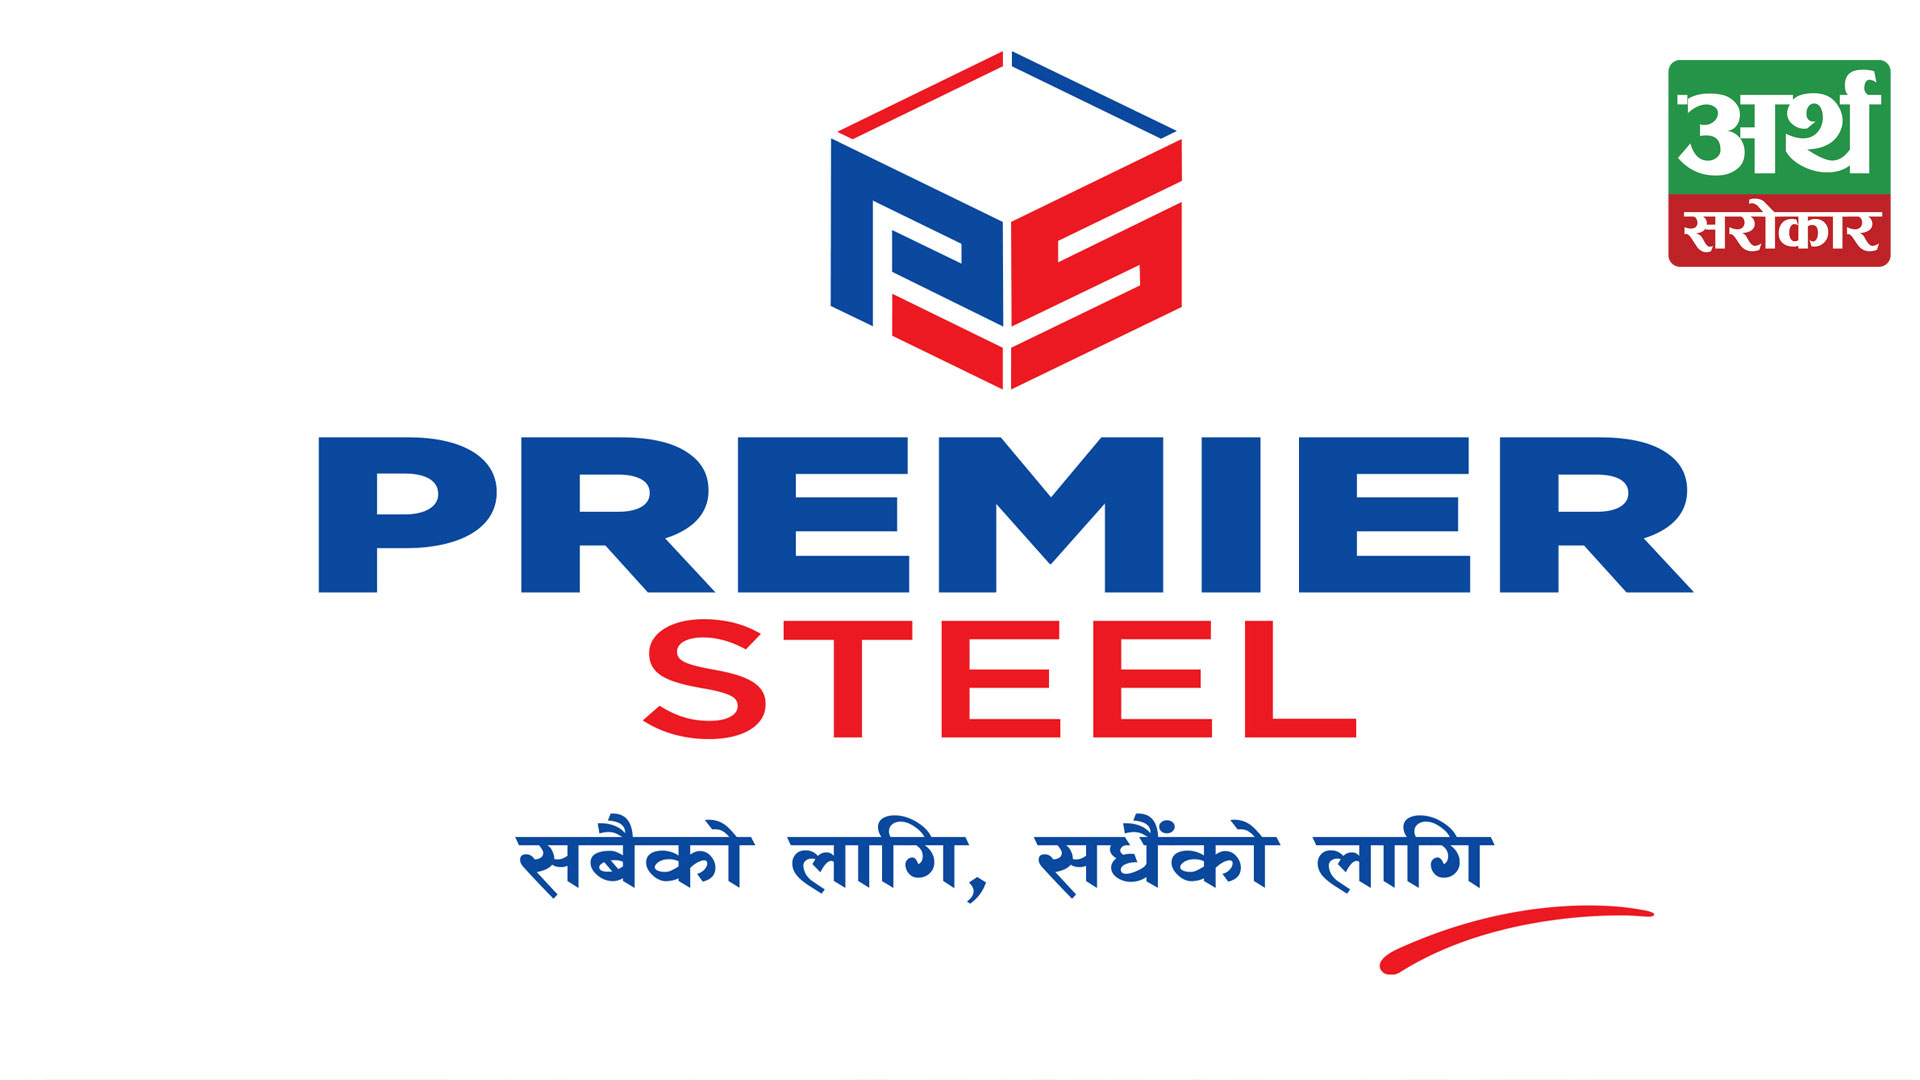 Premier Steel: First Company To Receive NS Certification For 36mm